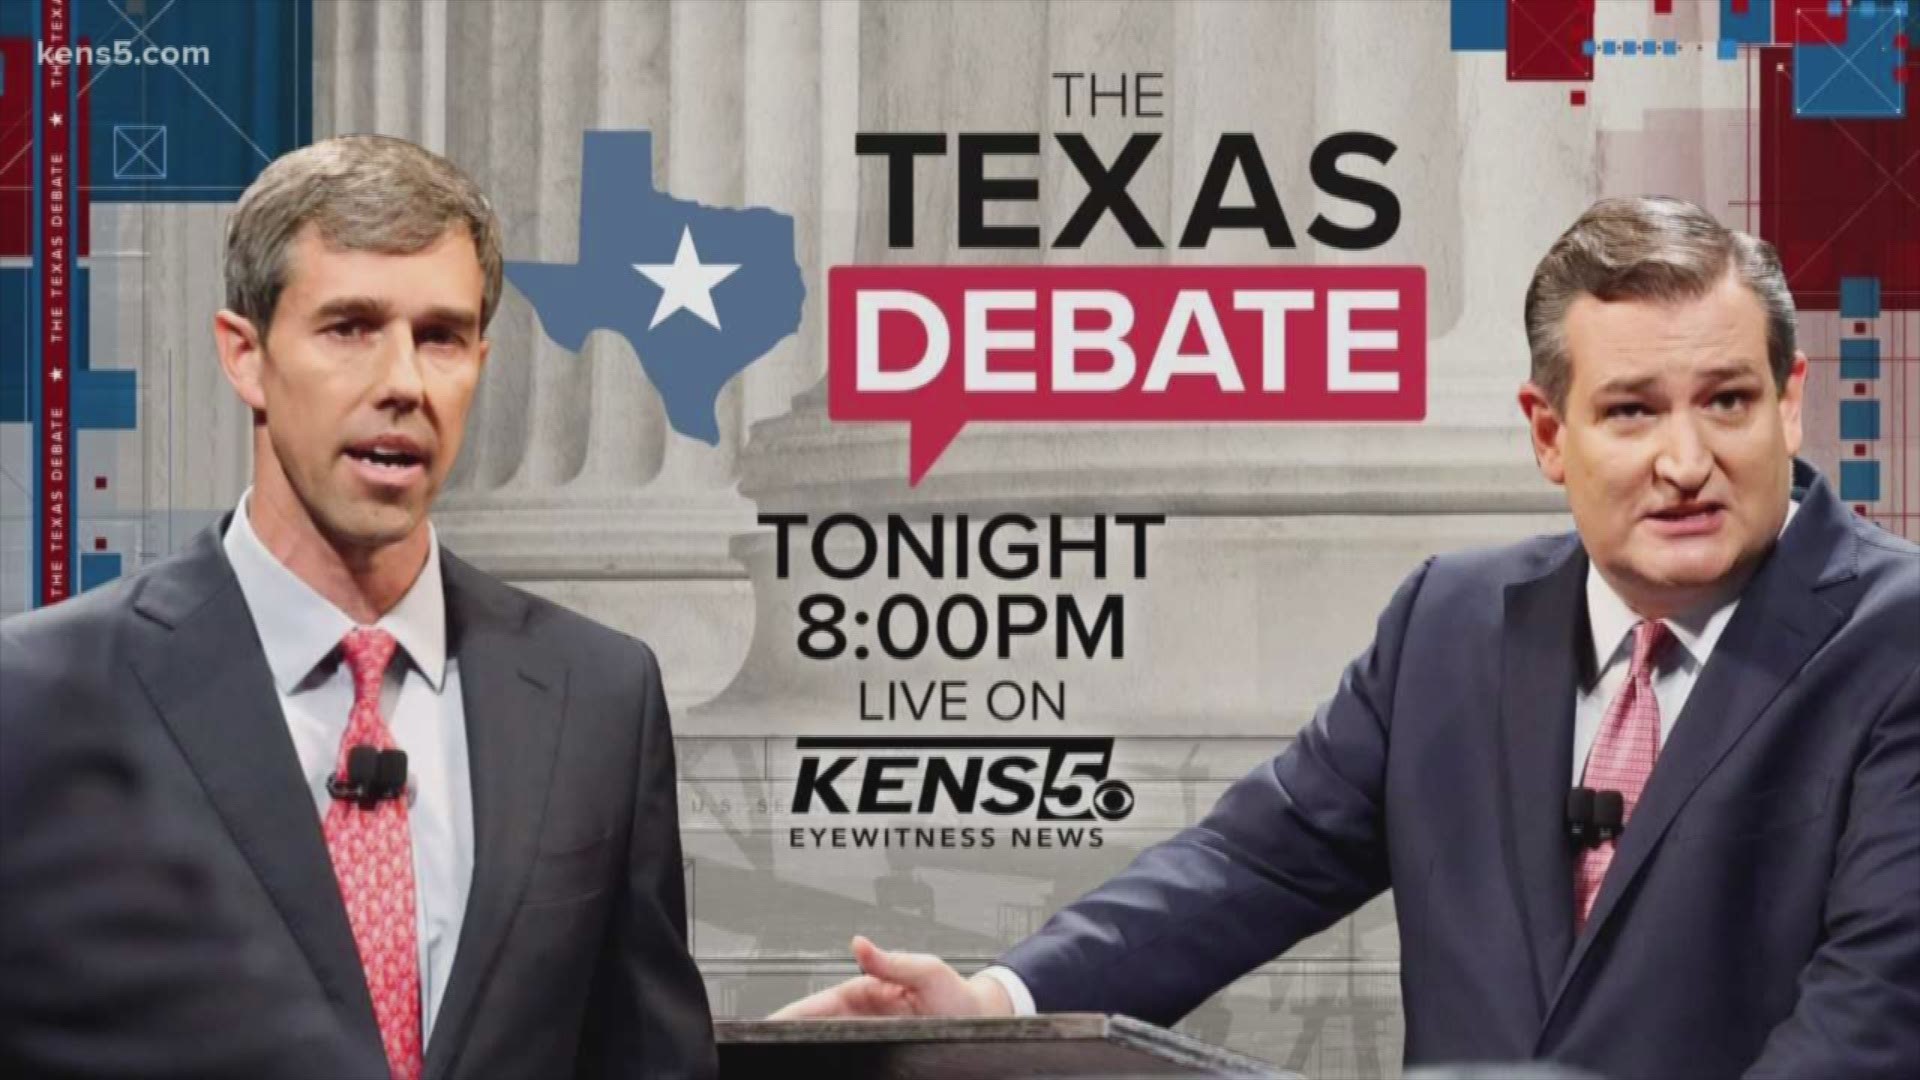 Watch the debate on KENS 5 at 8 pm CST.